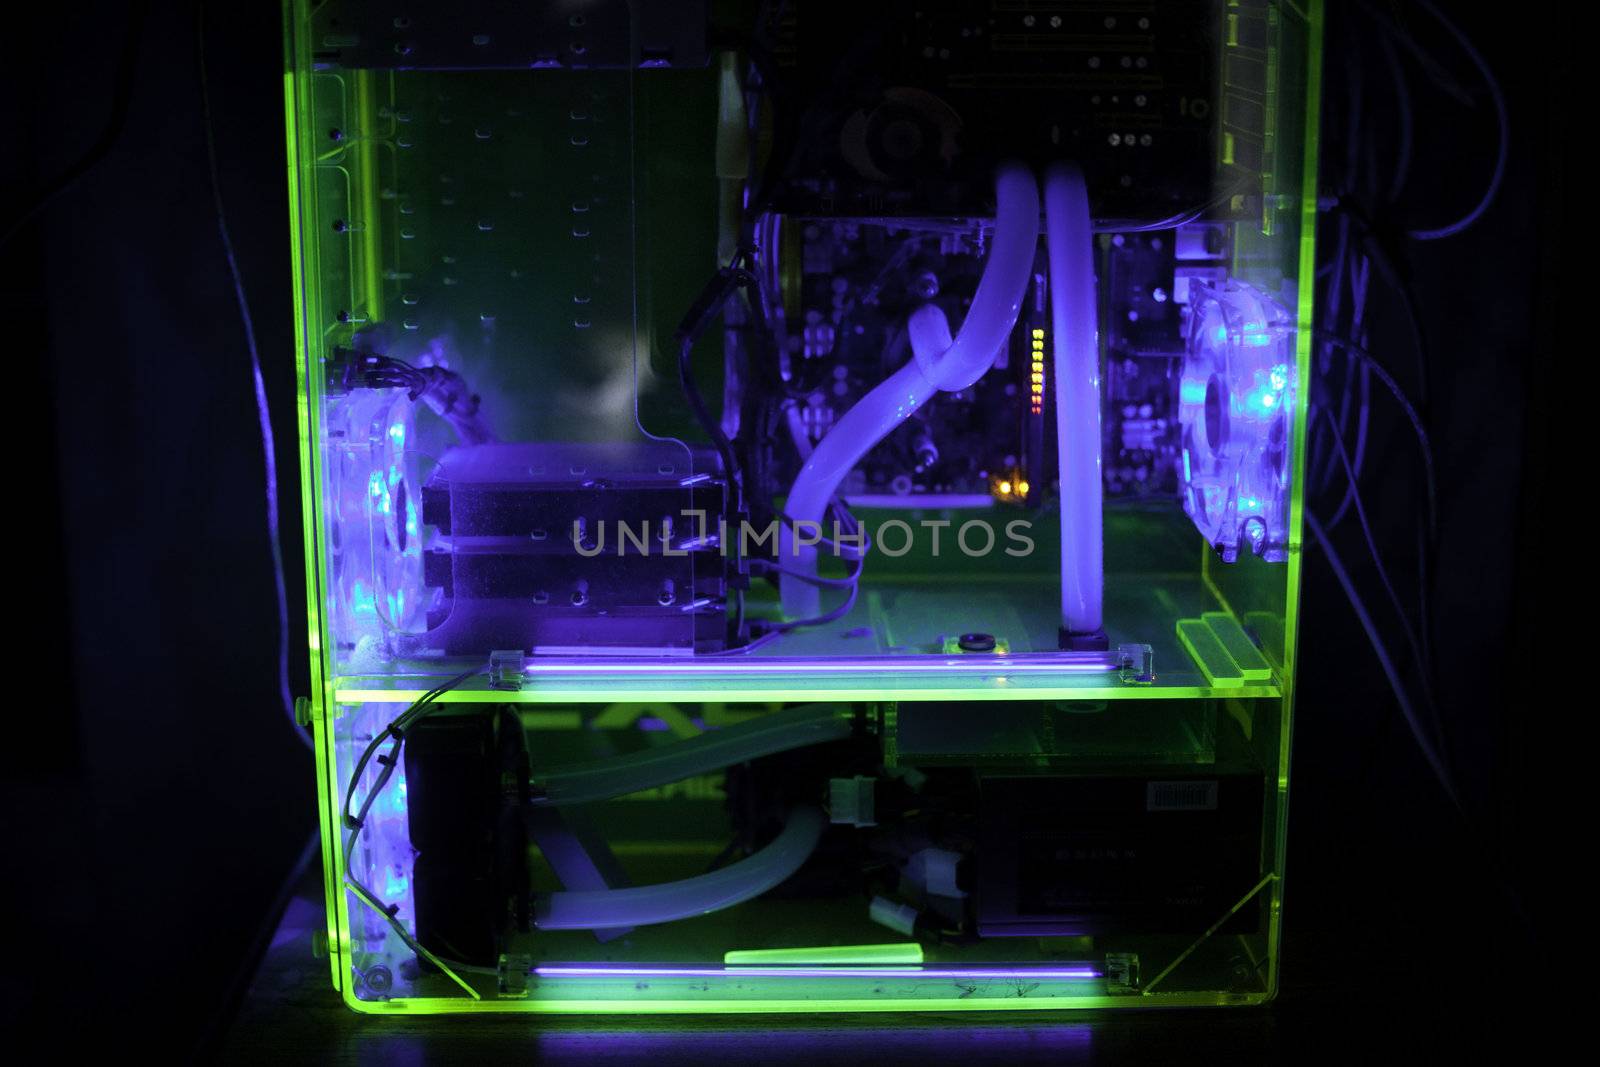 Transparent computer with liquid cooling and UV light